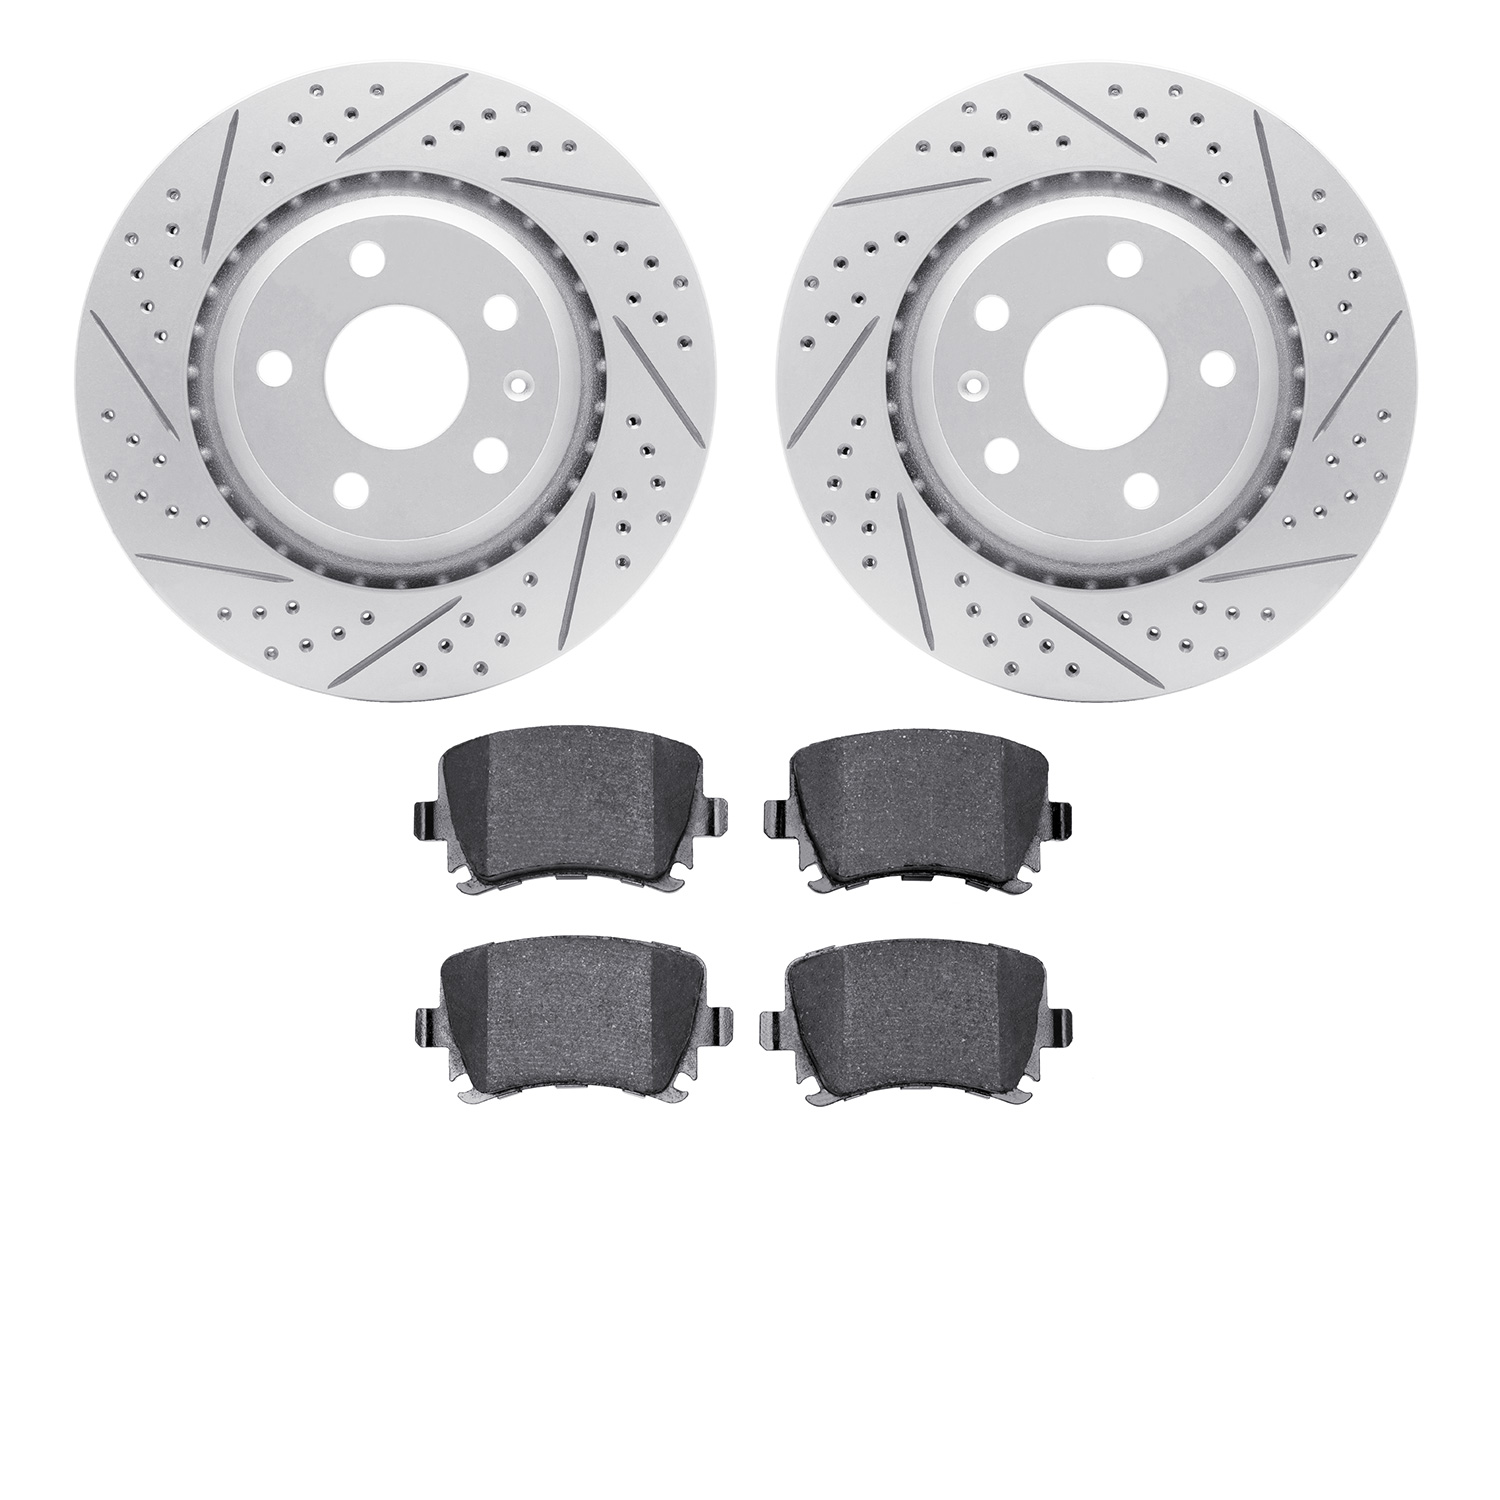 2502-73051 Geoperformance Drilled/Slotted Rotors w/5000 Advanced Brake Pads Kit, 2012-2013 Audi/Volkswagen, Position: Rear